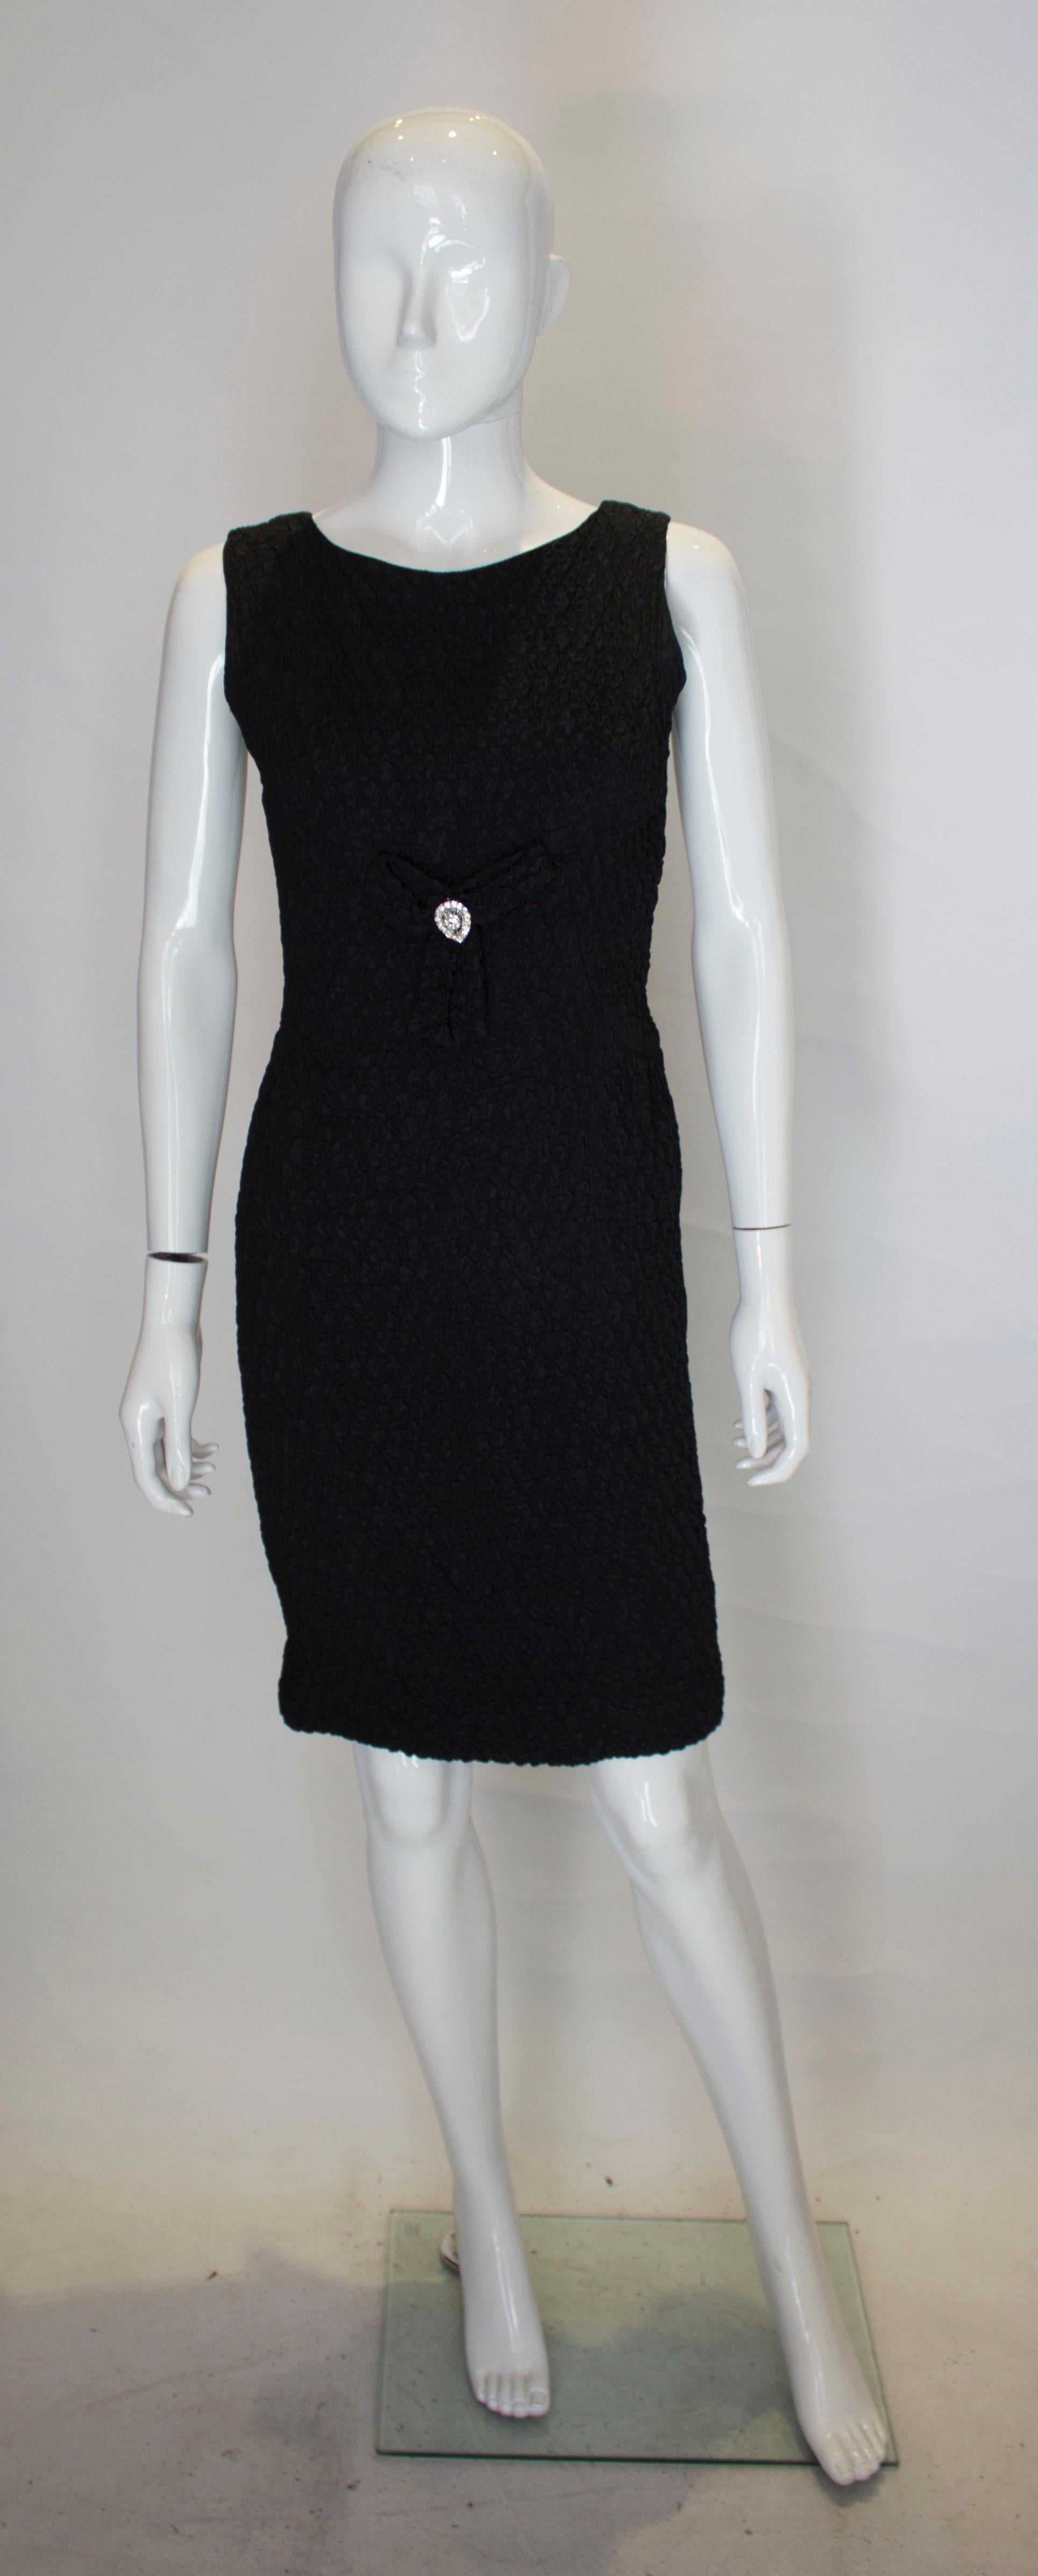 A chic vintage little black dress by Blanes of London. The dress is  in a wonderful puckered  fabric and has a bow and diamante detail at the front.  It has a back zip below the waist and button back fastening above the waist.